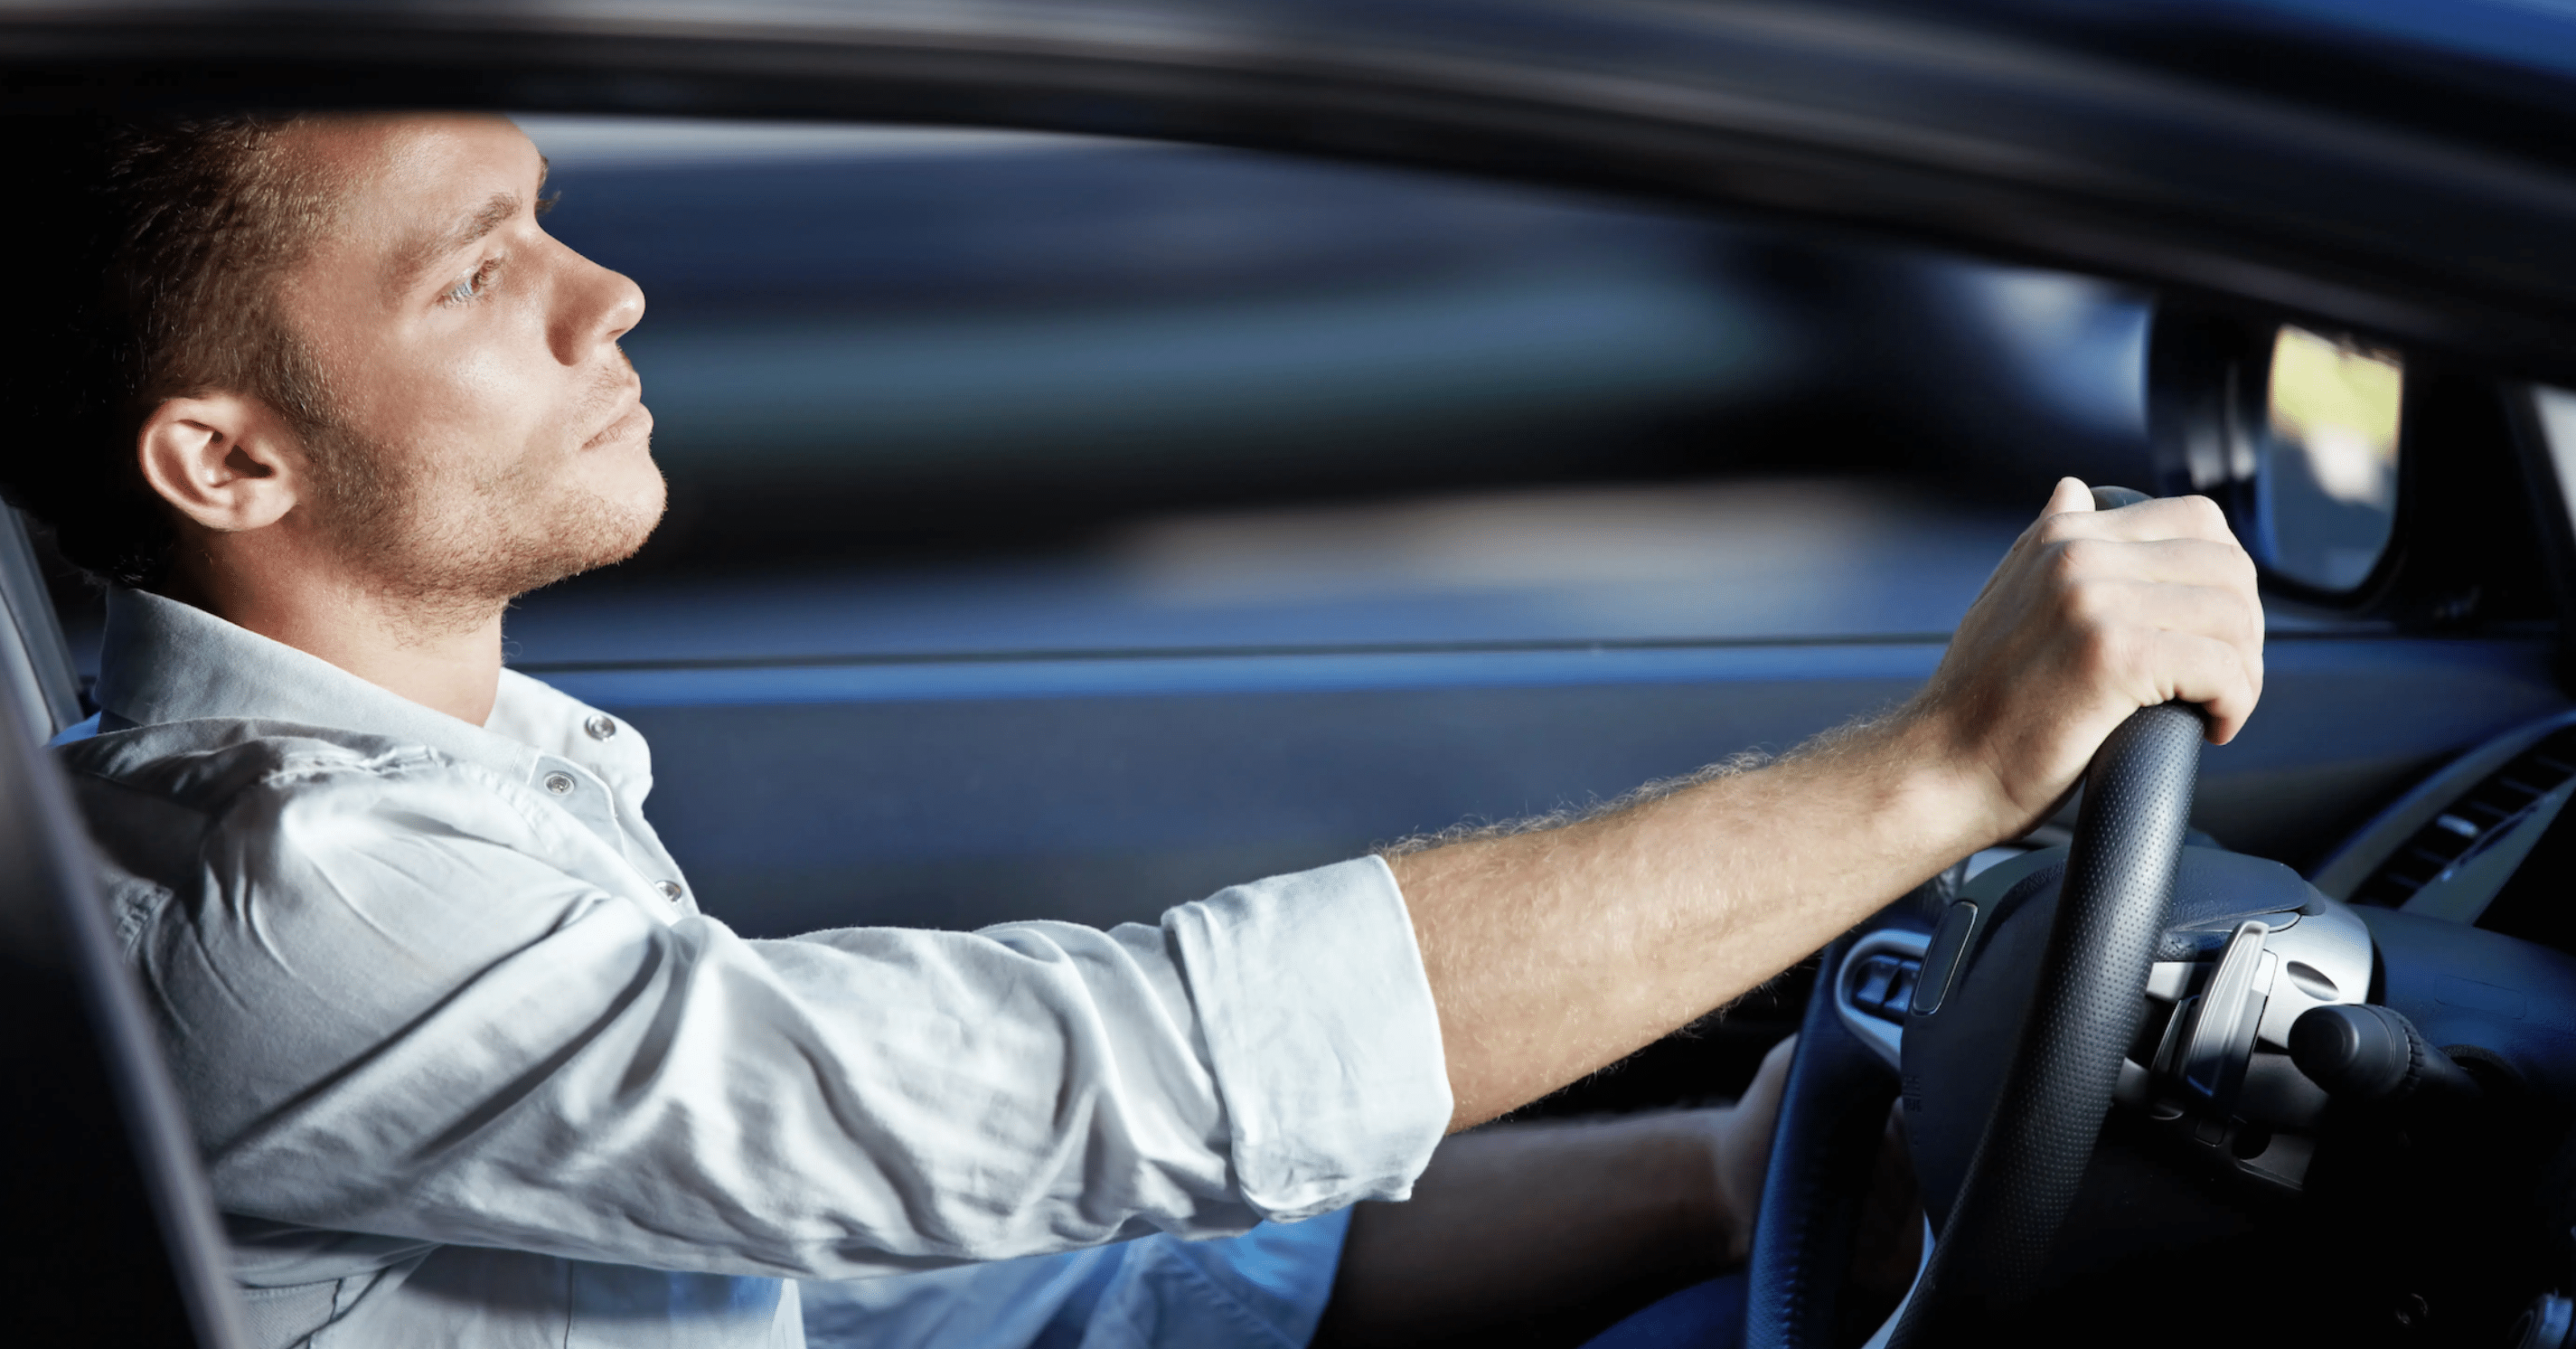 Reducing risk of driver fatigue with telematics